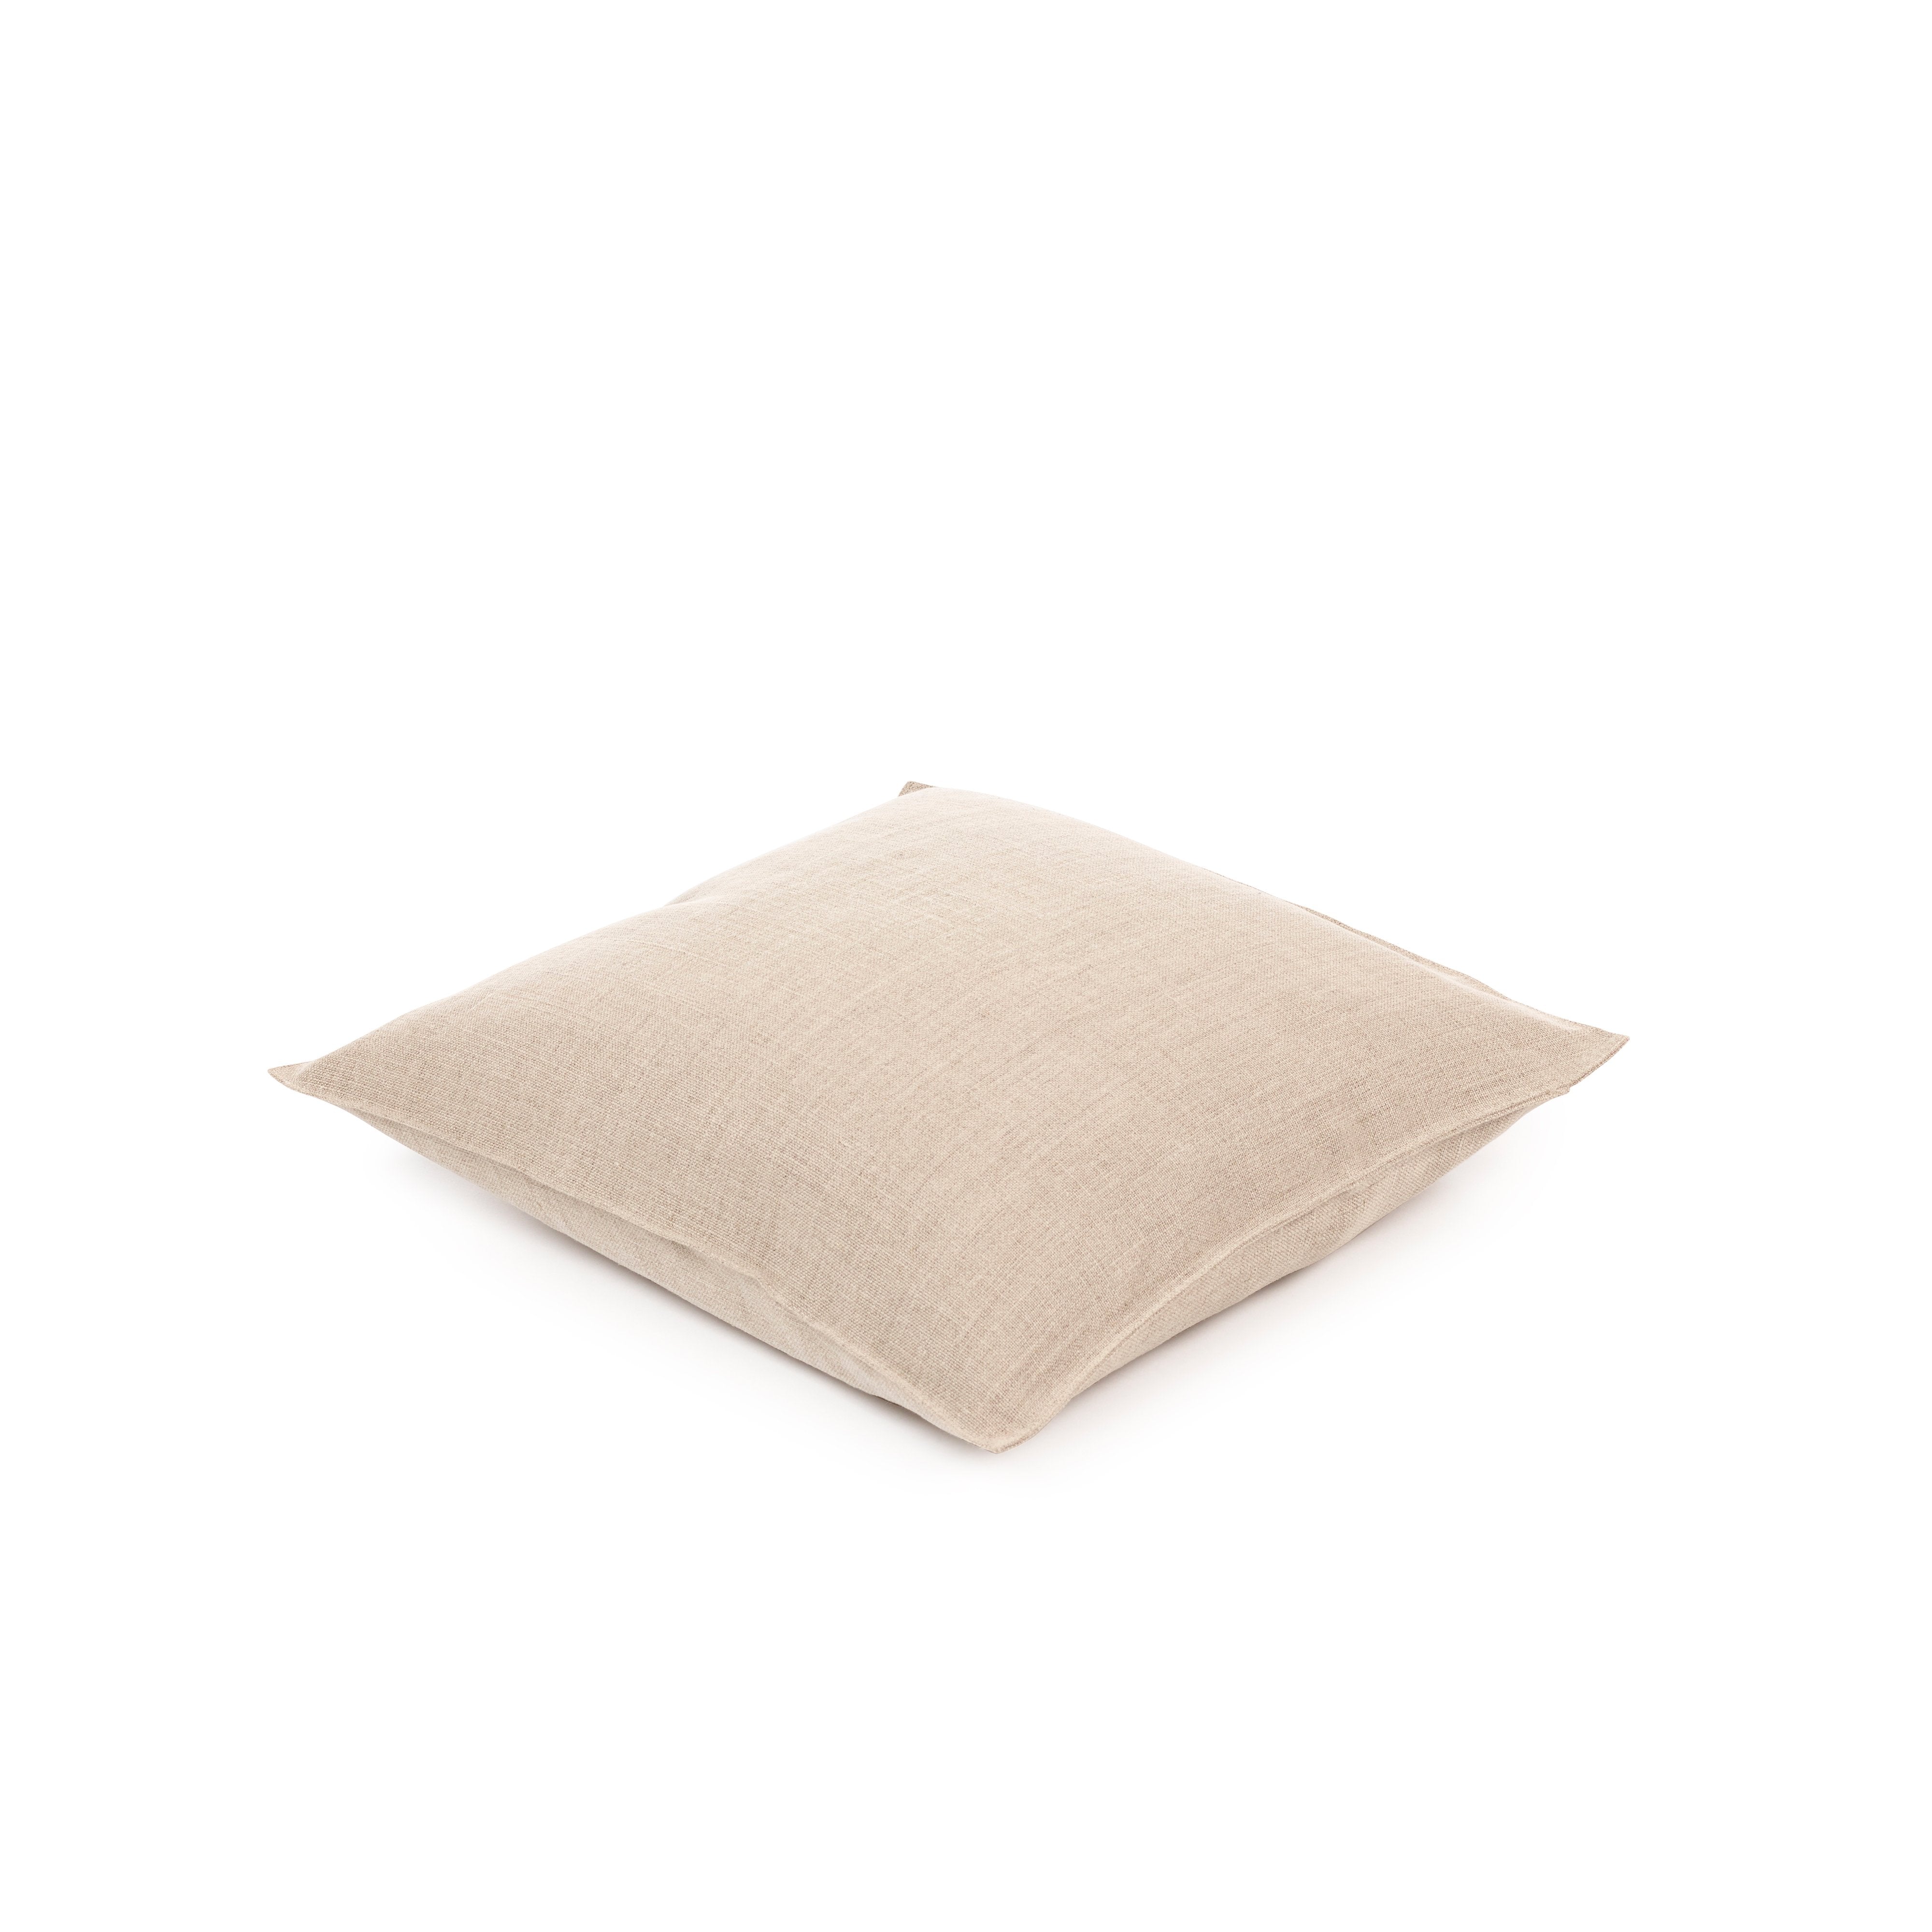 Napoli Pillow Cover, Flax